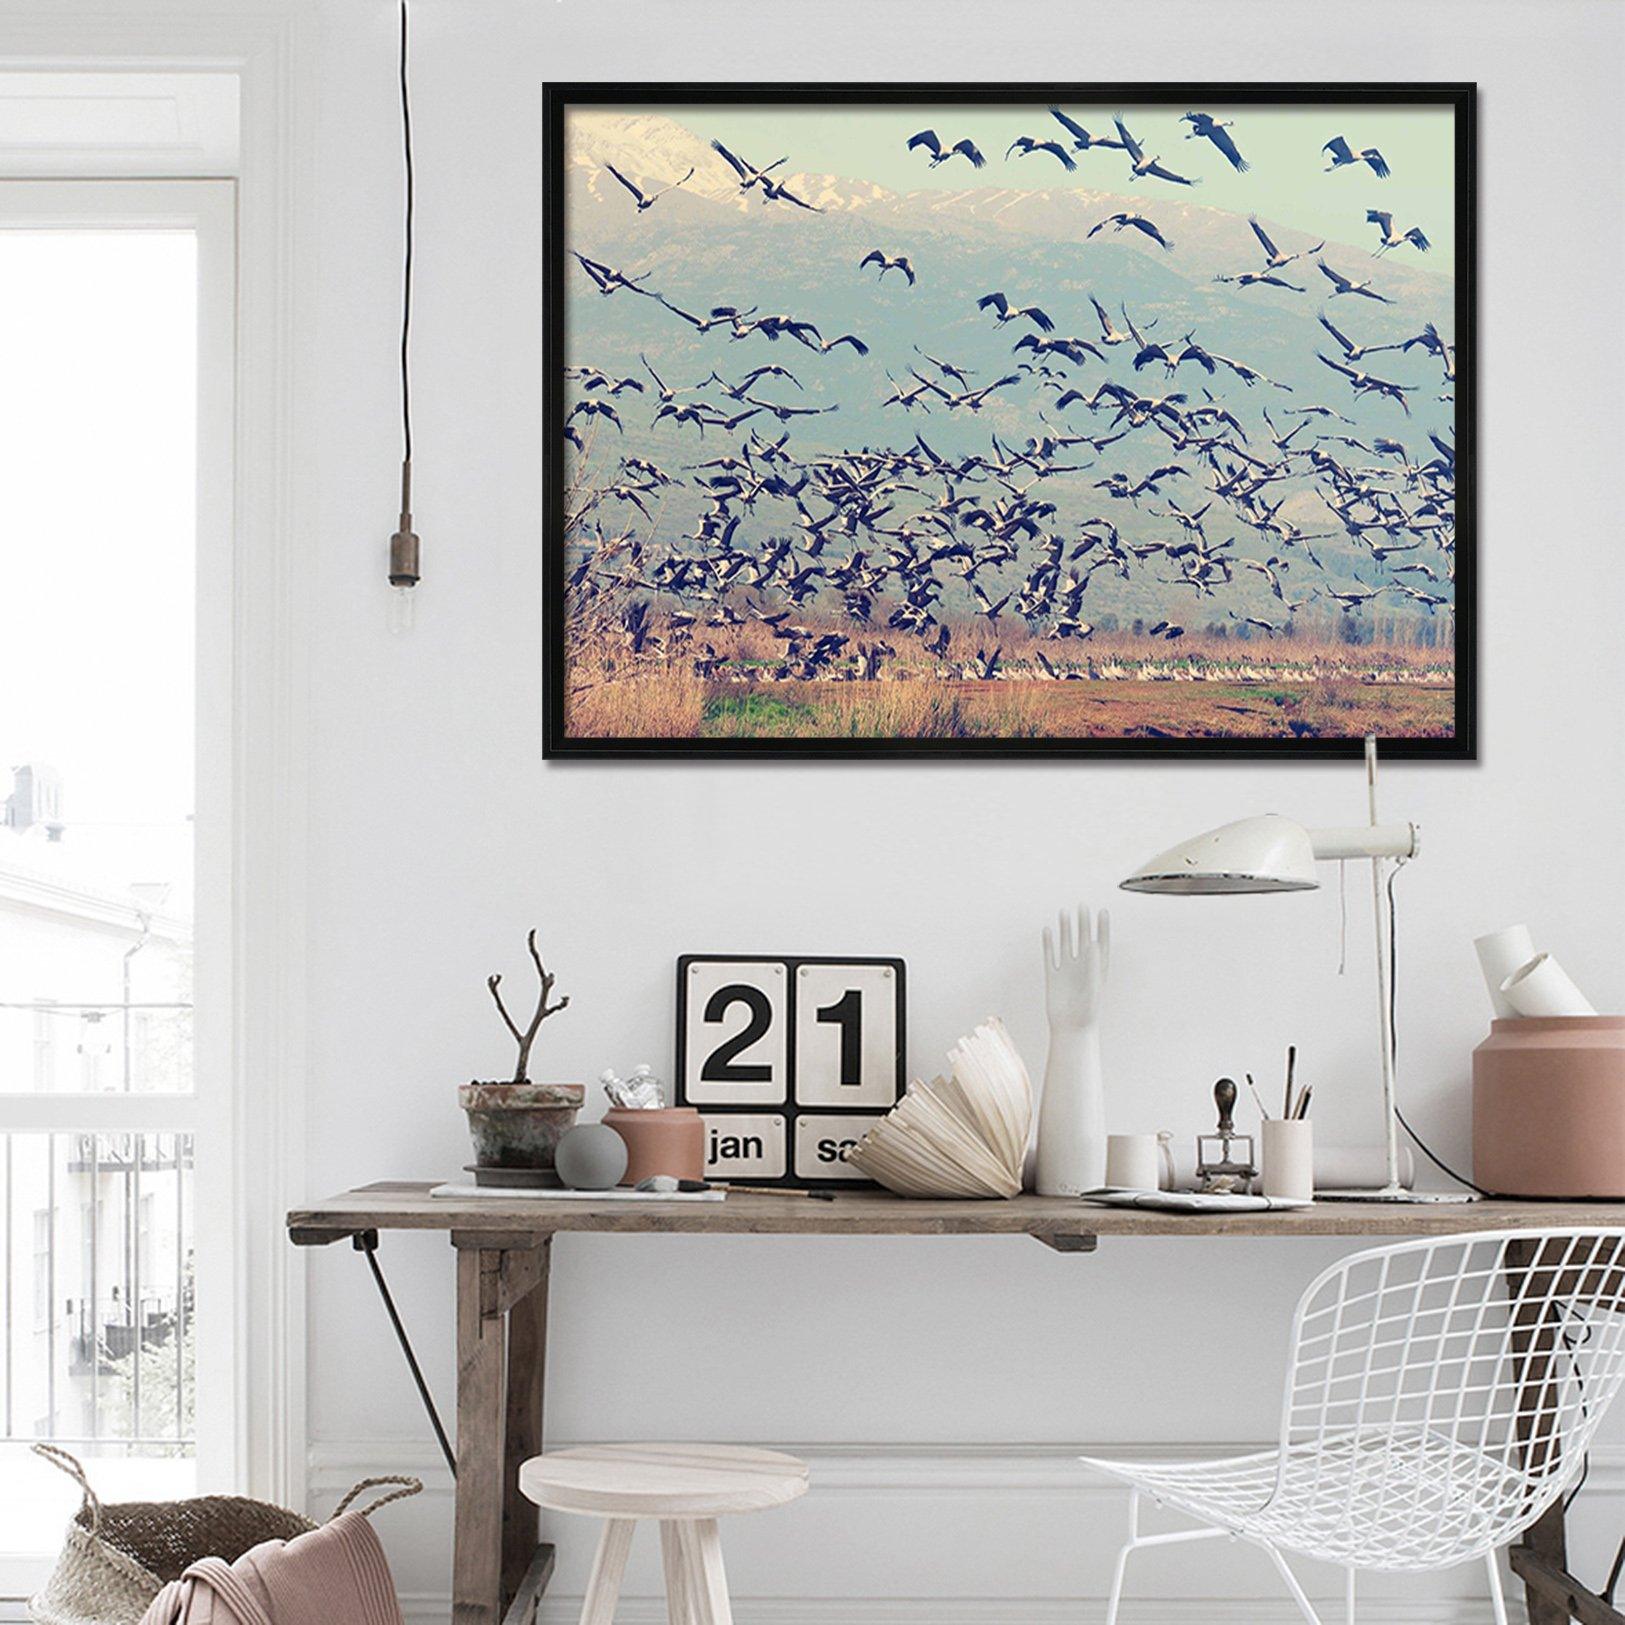 3D Geese South Fly 200 Fake Framed Print Painting Wallpaper AJ Creativity Home 